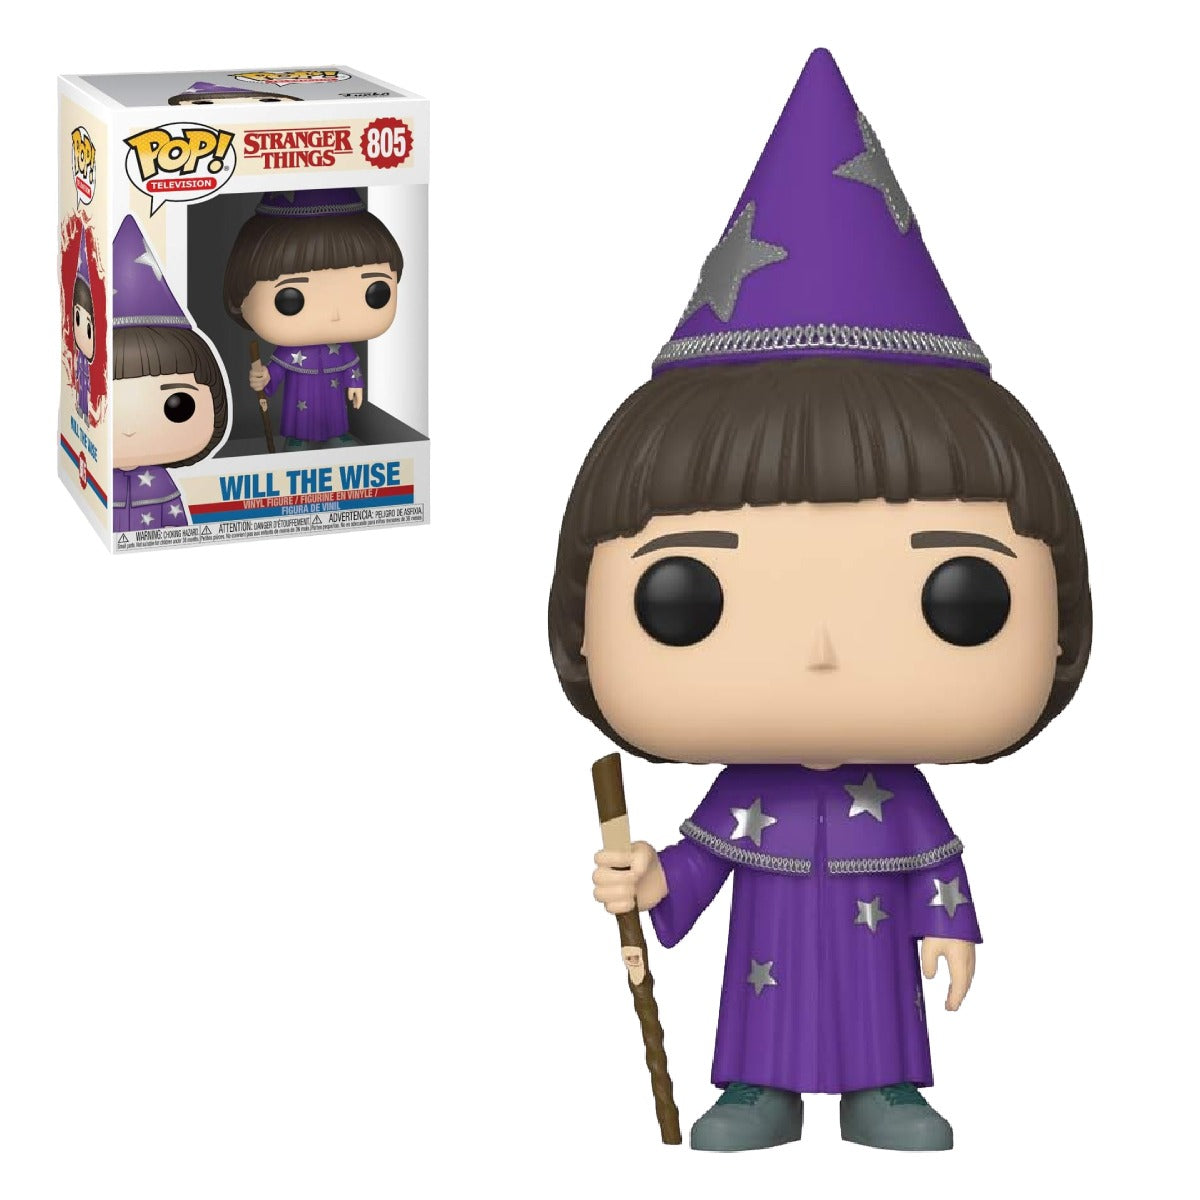 FUNKO POP TV STRANGER THINGS WILL THE WISE 805